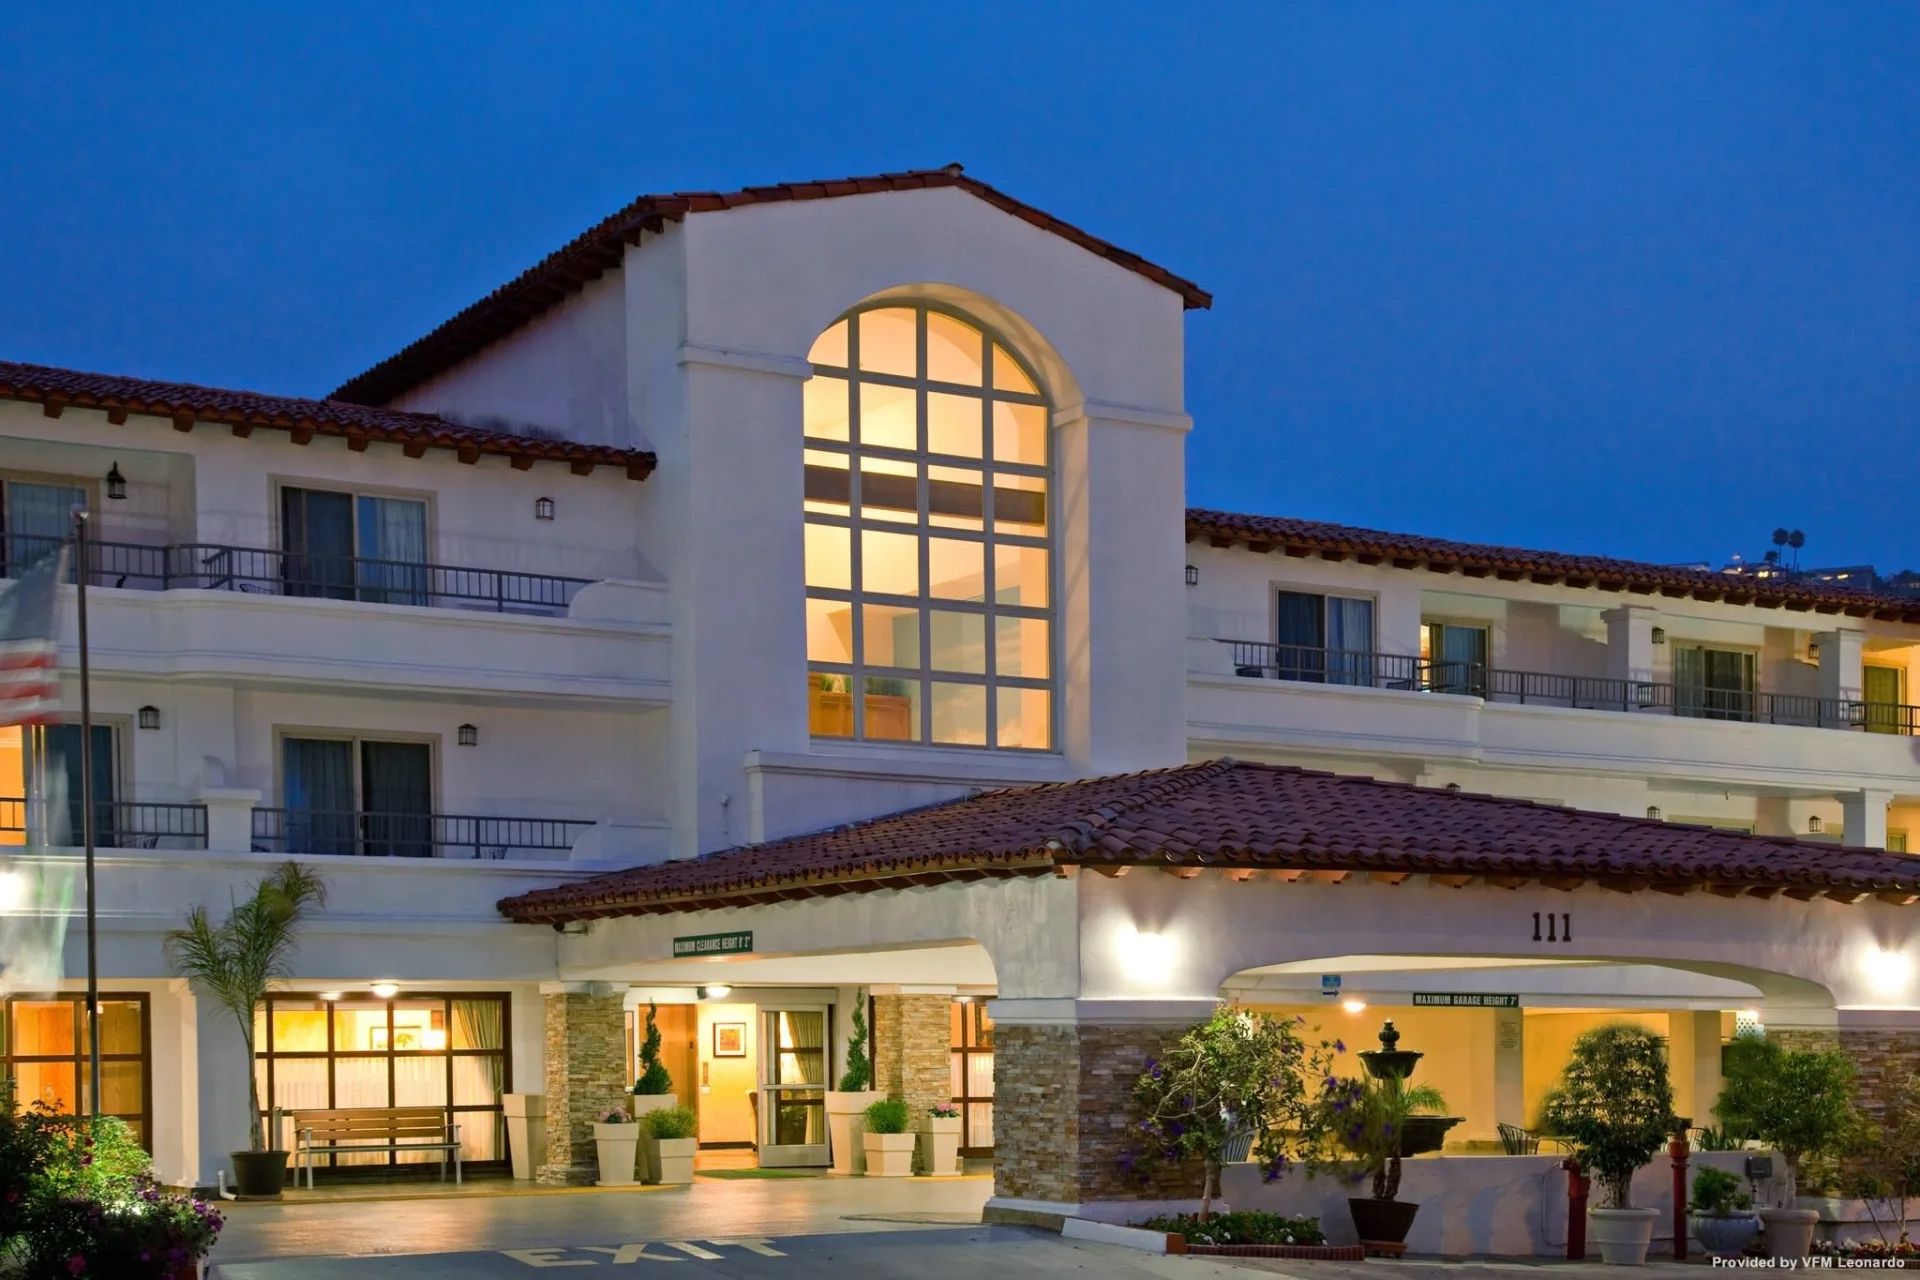 Nomads Hotel, San Clemente CA